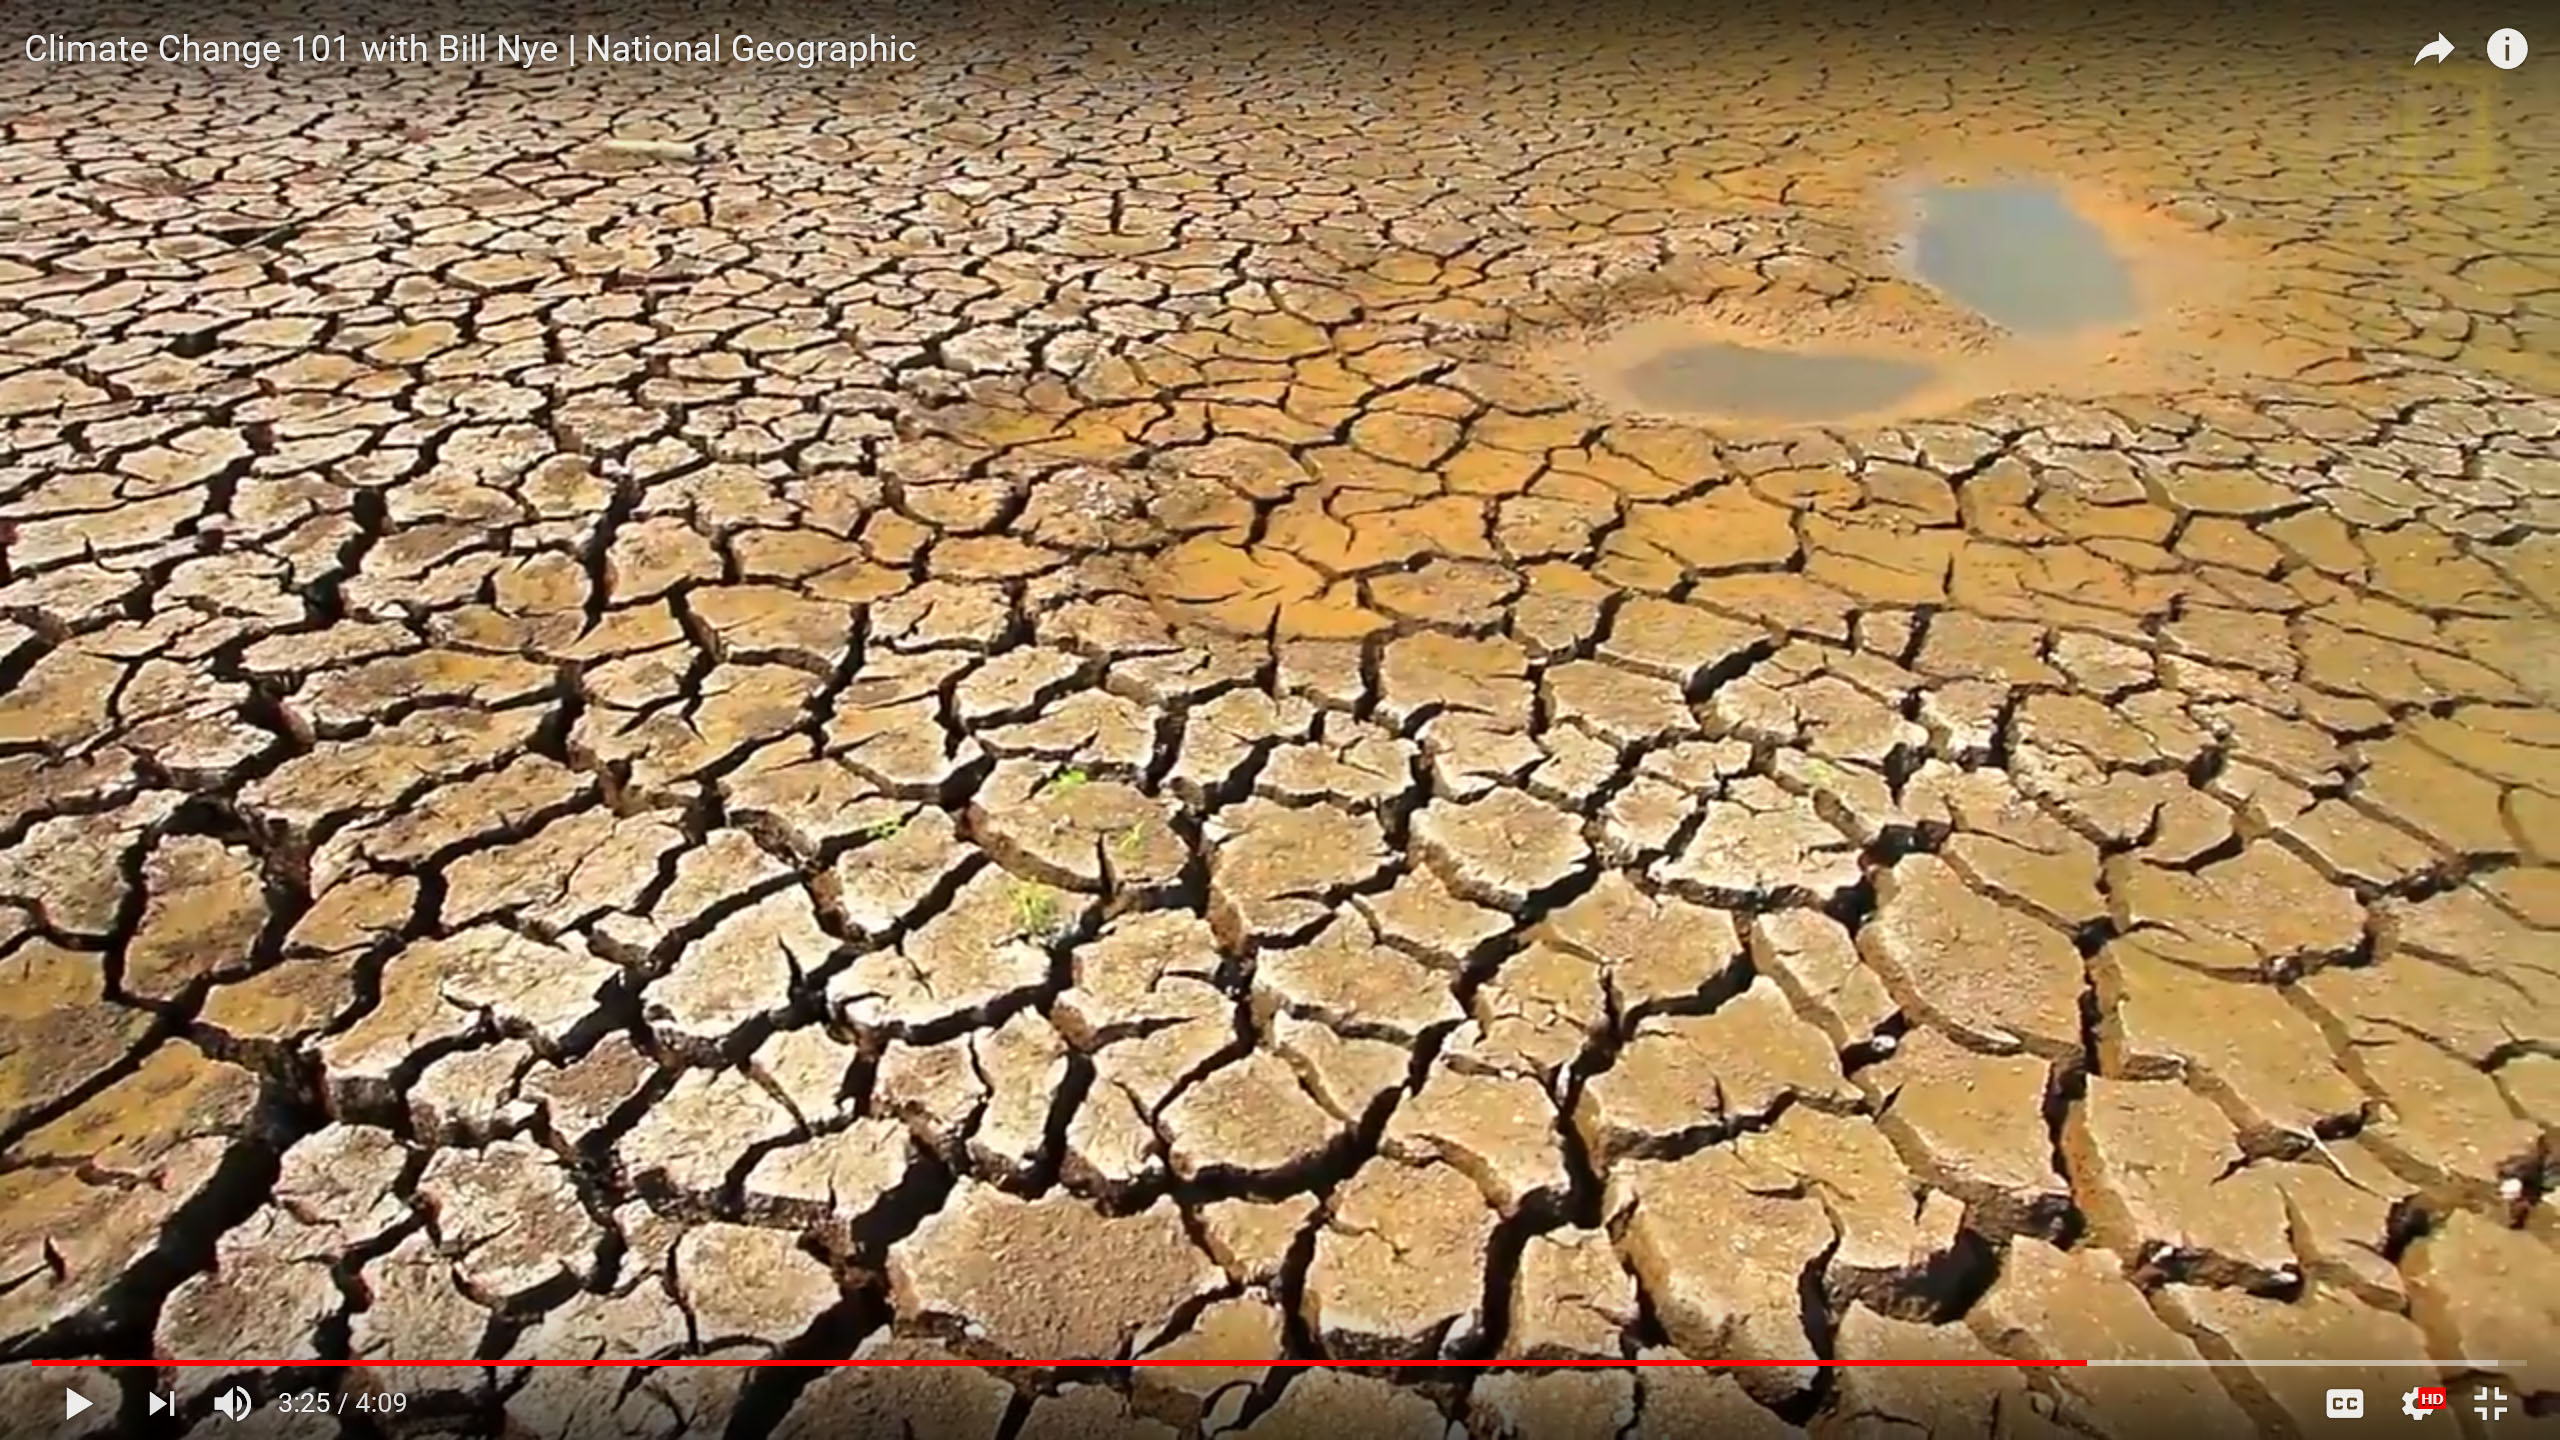 Climate Change, a 5 minute video